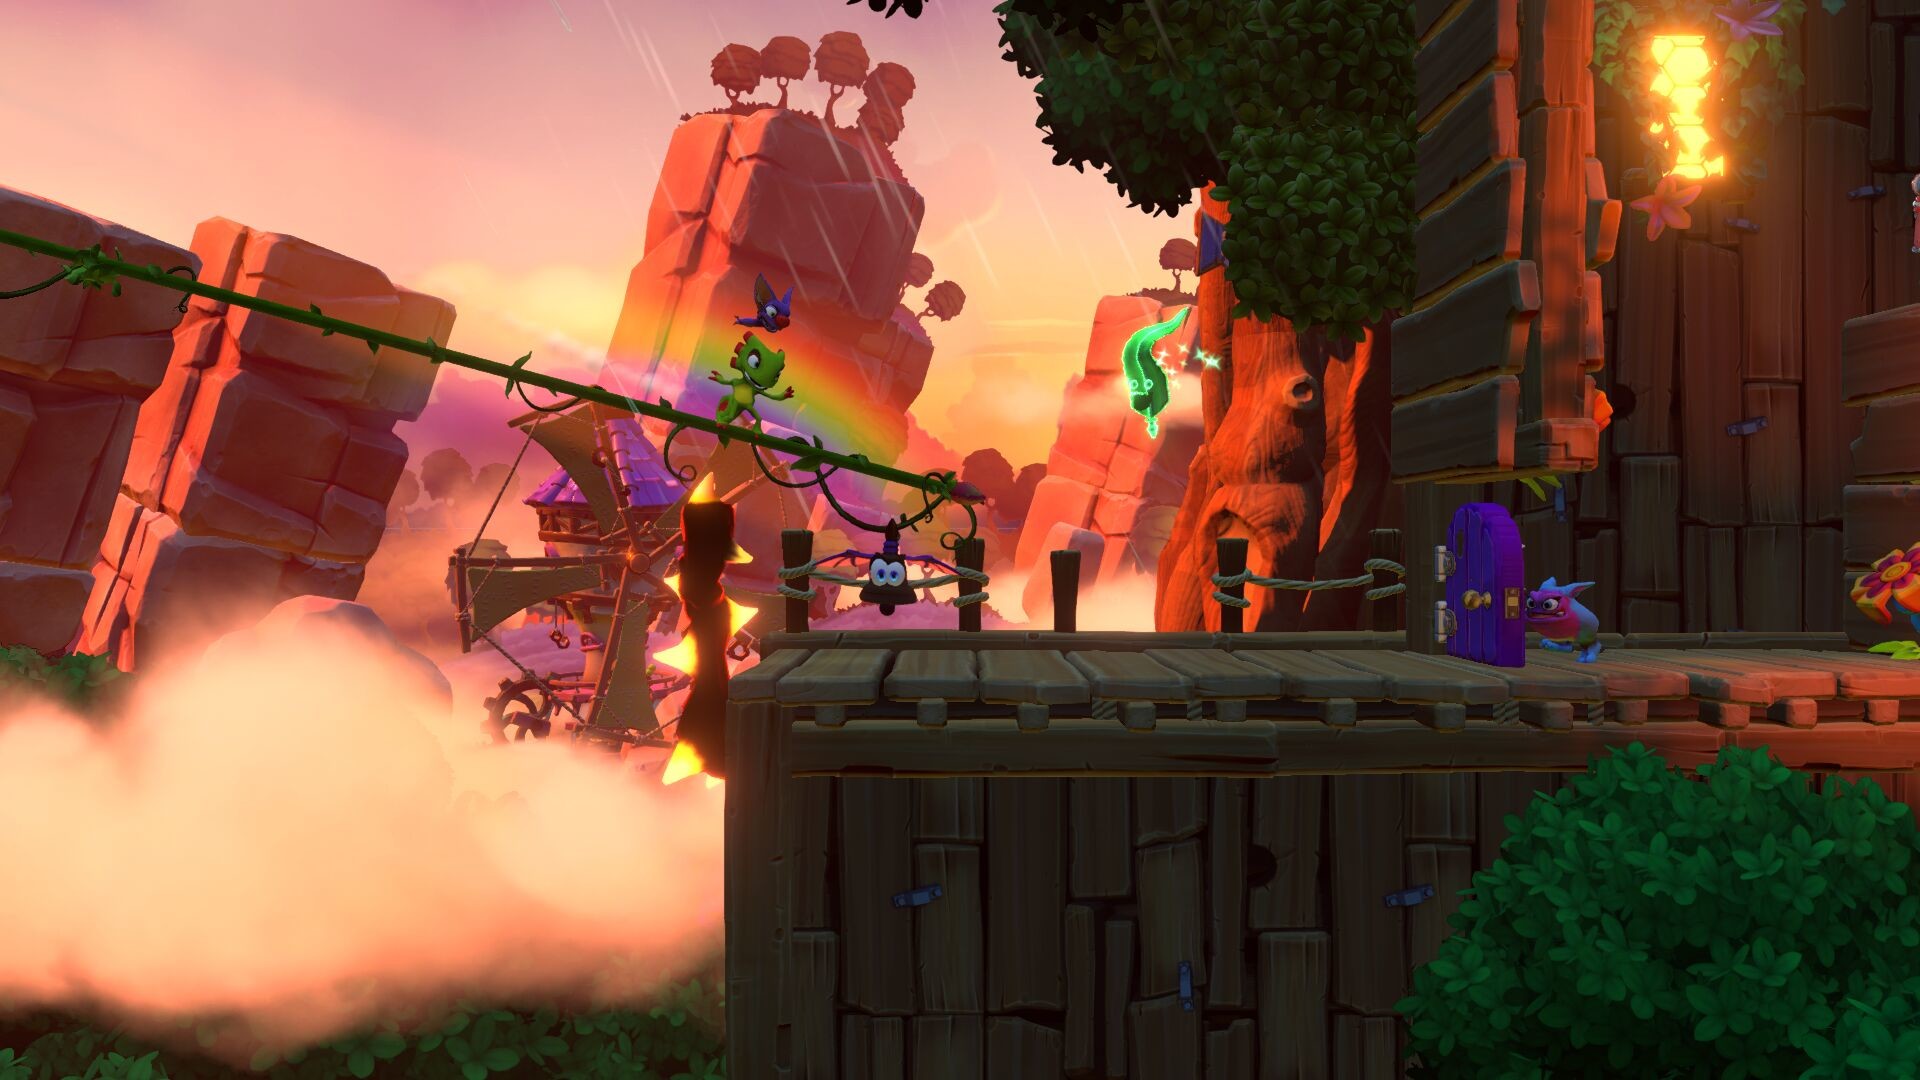 Yooka-Laylee and the Impossible Lair on Steam